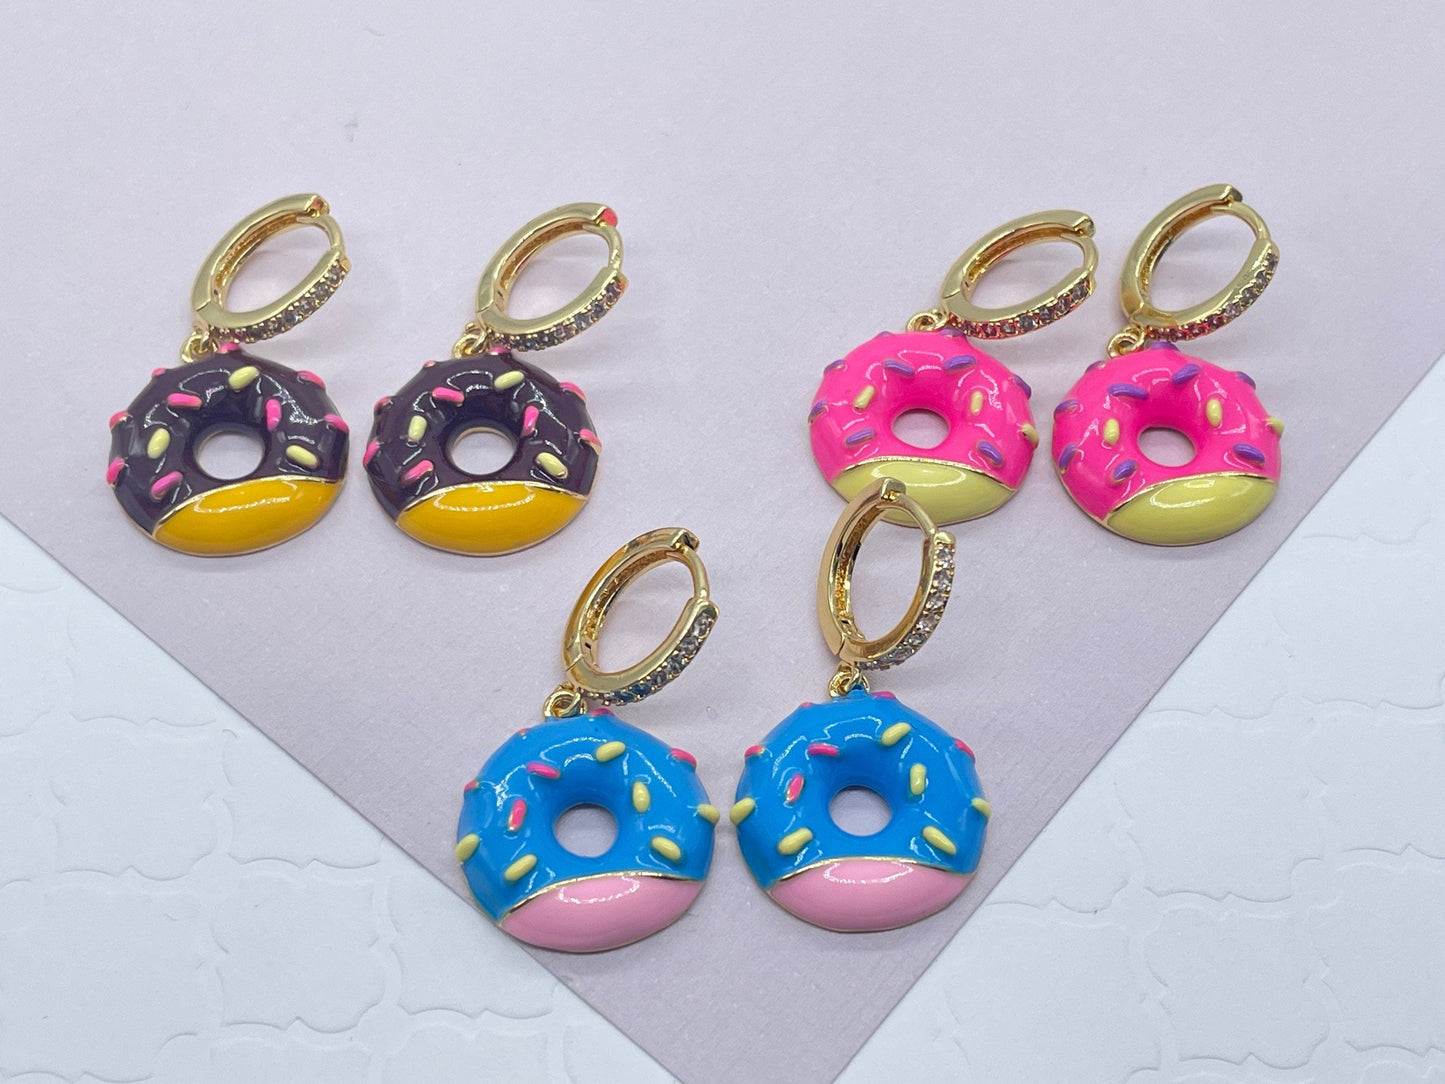 18K Gold Layered Colorful Donut Earrings Available In Different Colors And Tastes